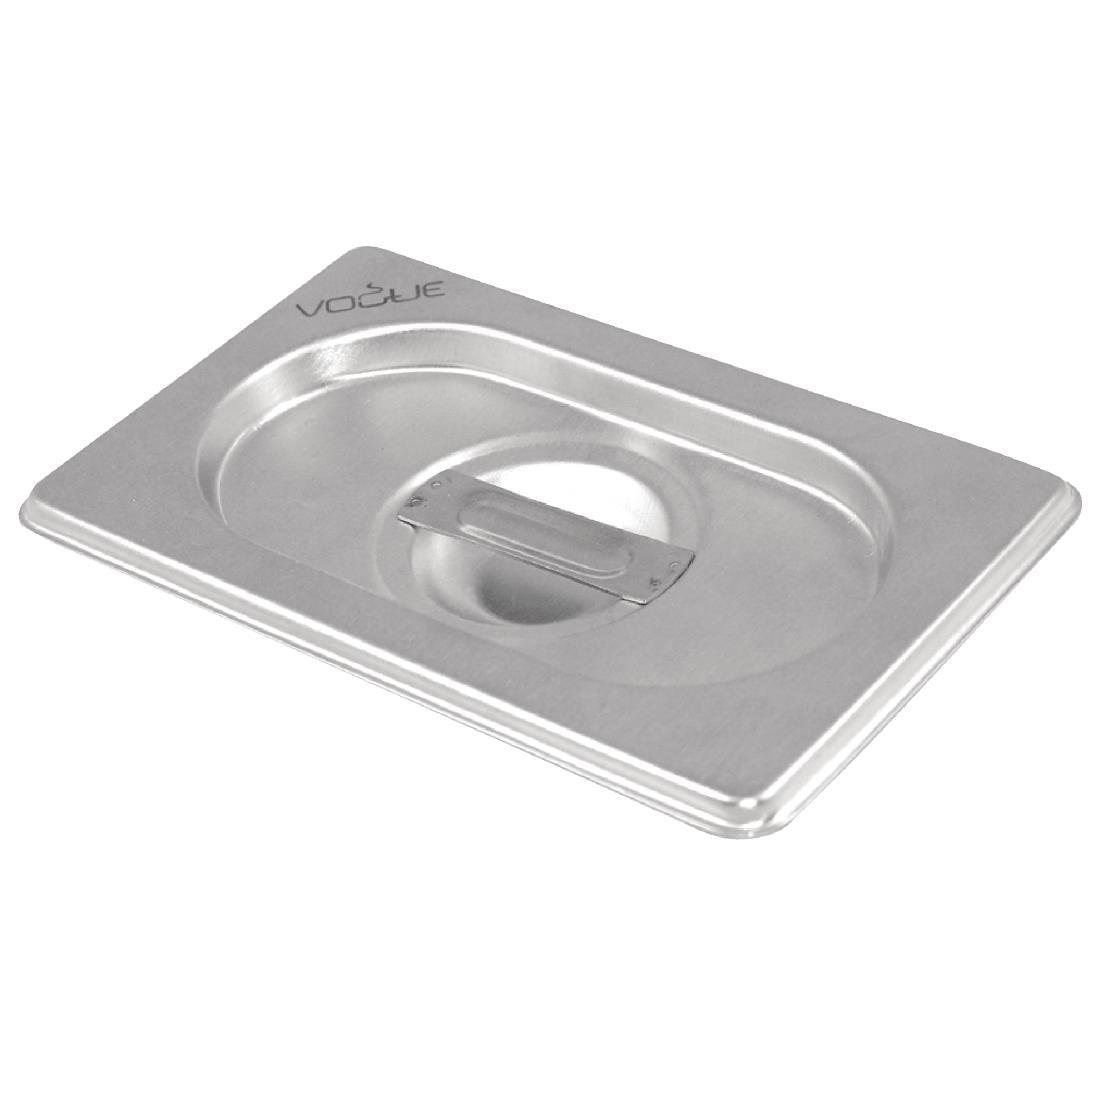 Vogue Stainless Steel 1/2 Gastronorm Tray Lid - HospoStore